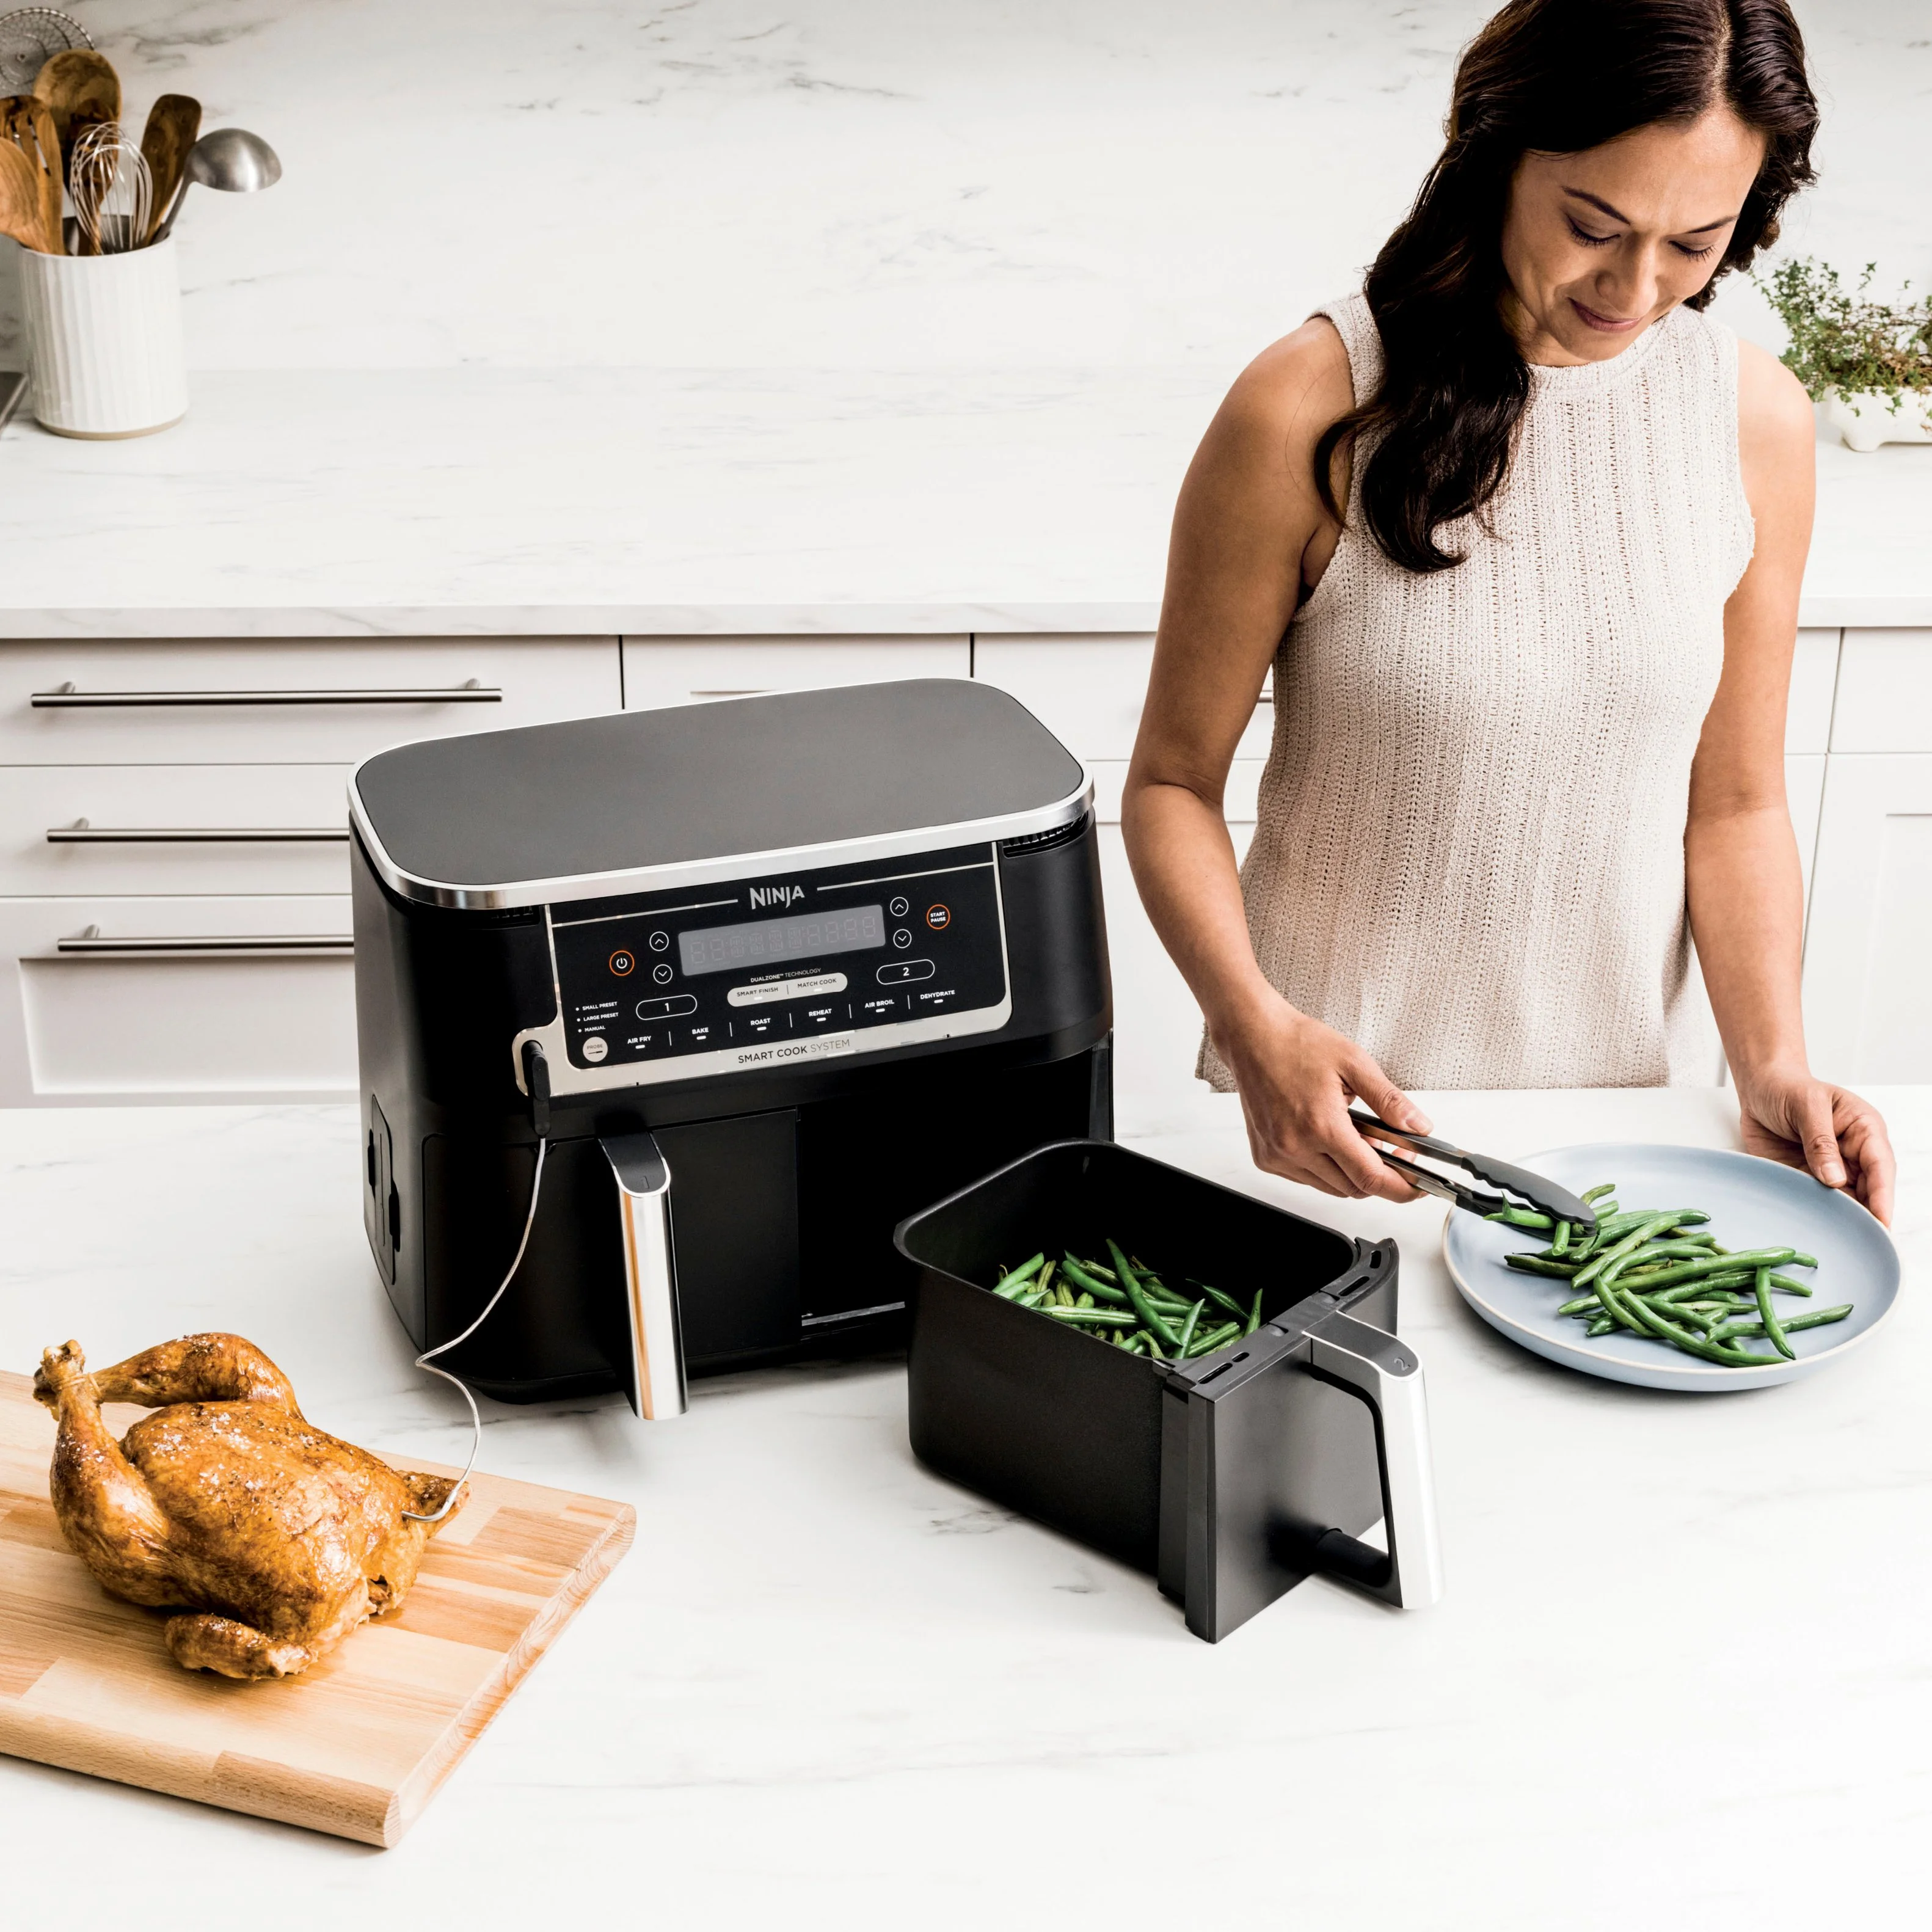 Ninja - Foodi 6-in-1 10-qt. XL 2-Basket Air Fryer with DualZone Technology and Smart Cook System - Black